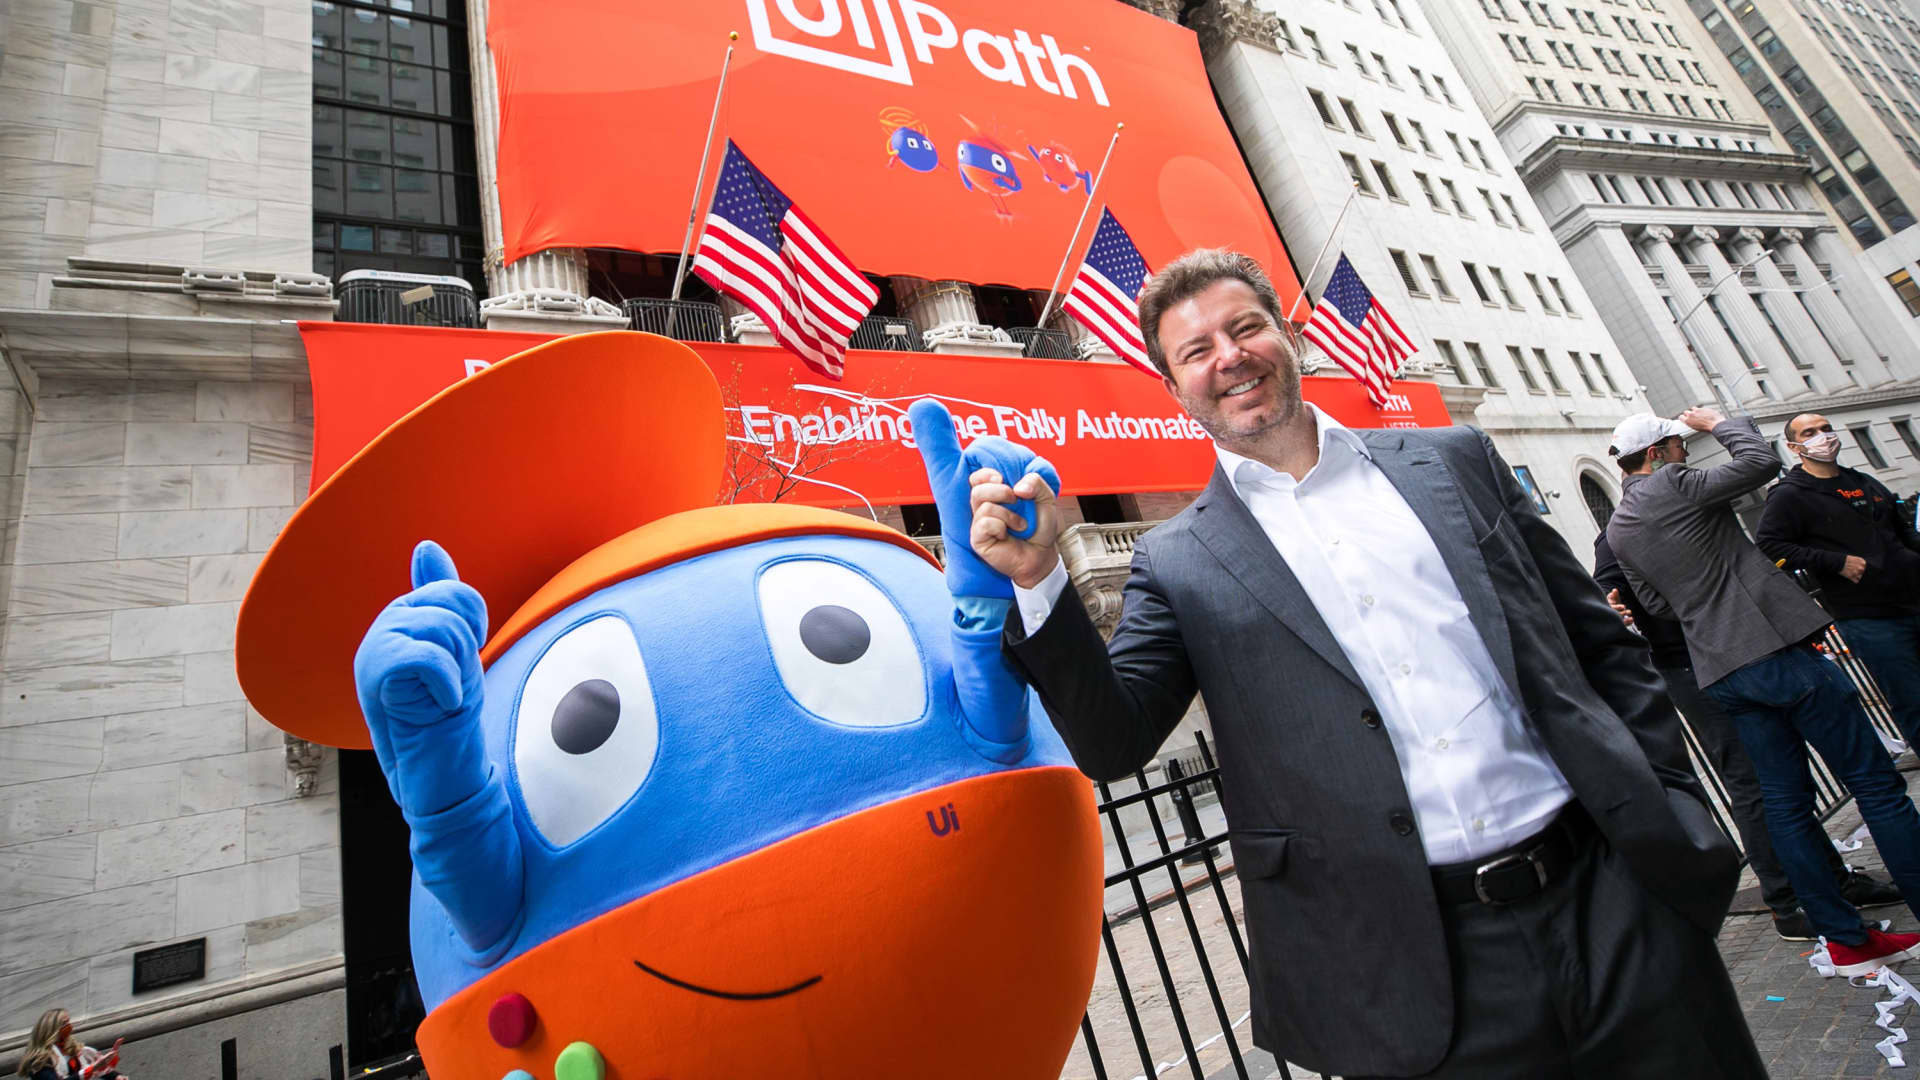 Sky stocks are rising, led by UiPath, as investors see the market bottom